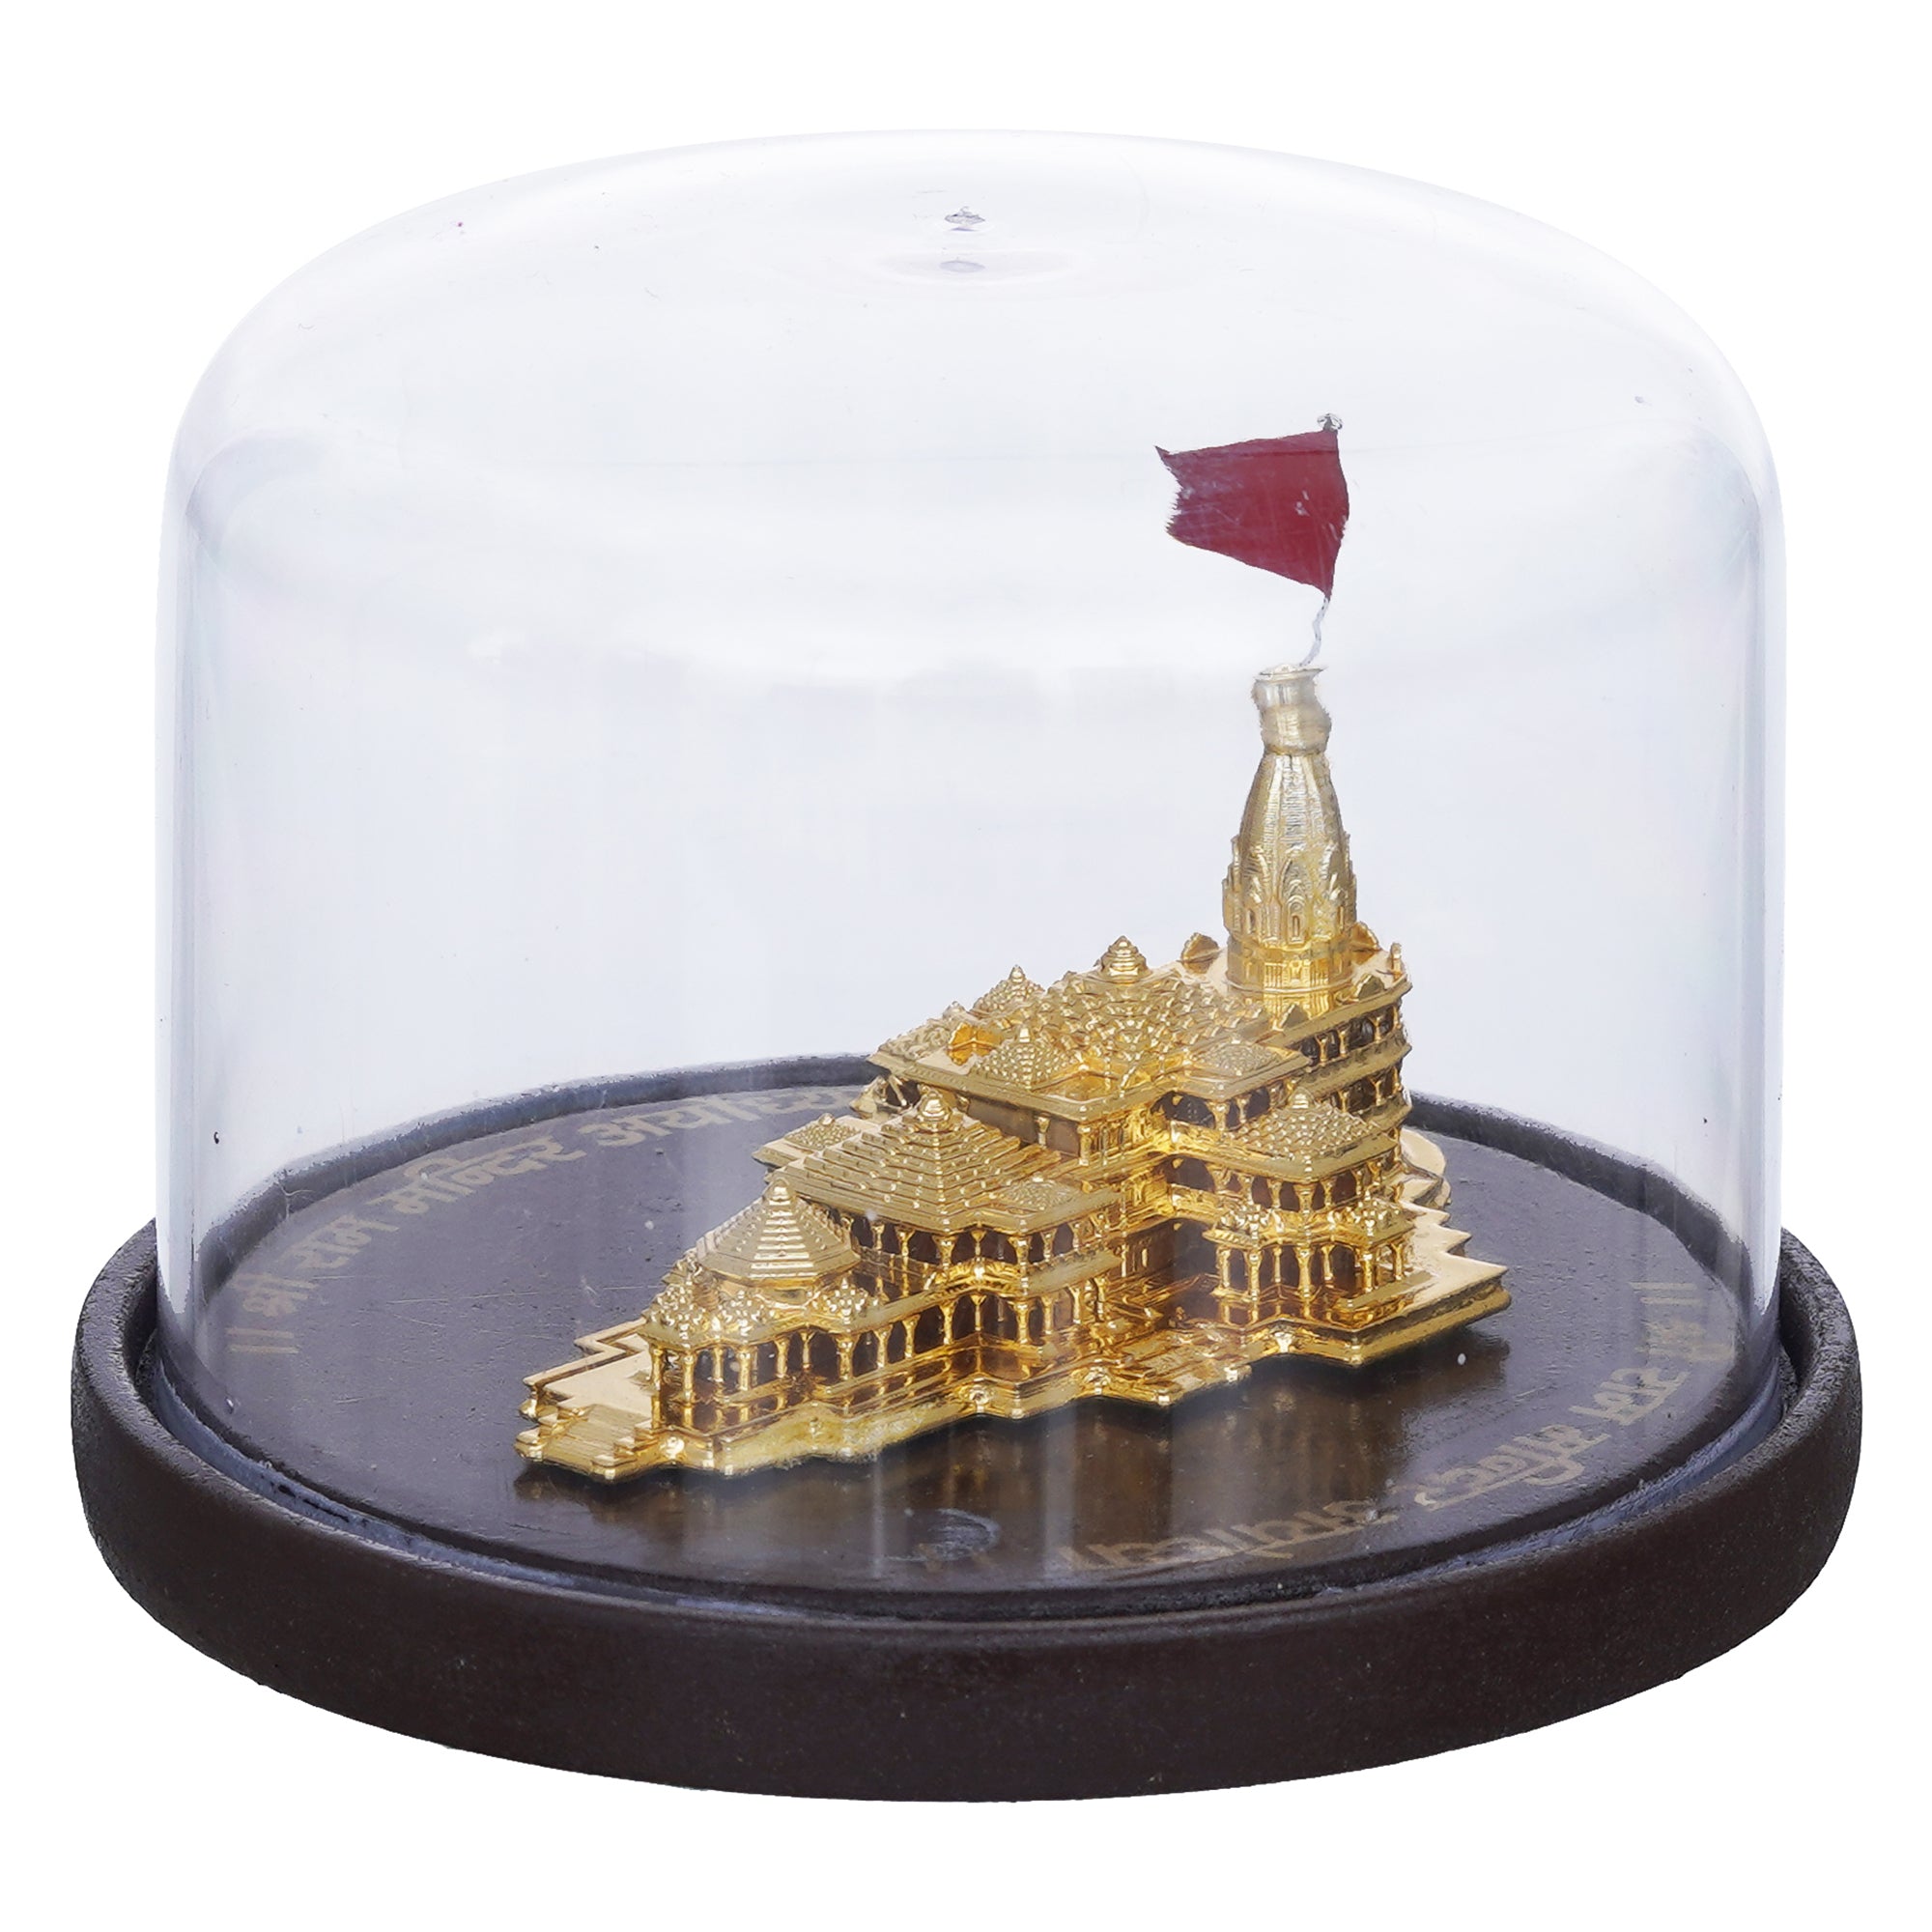 eCraftIndia Golden Shri Ram Mandir Ayodhya Model Authentic Designer Temple Covered by a Glass Dome - Perfect for Home Decor, and Spiritual Gifting 6